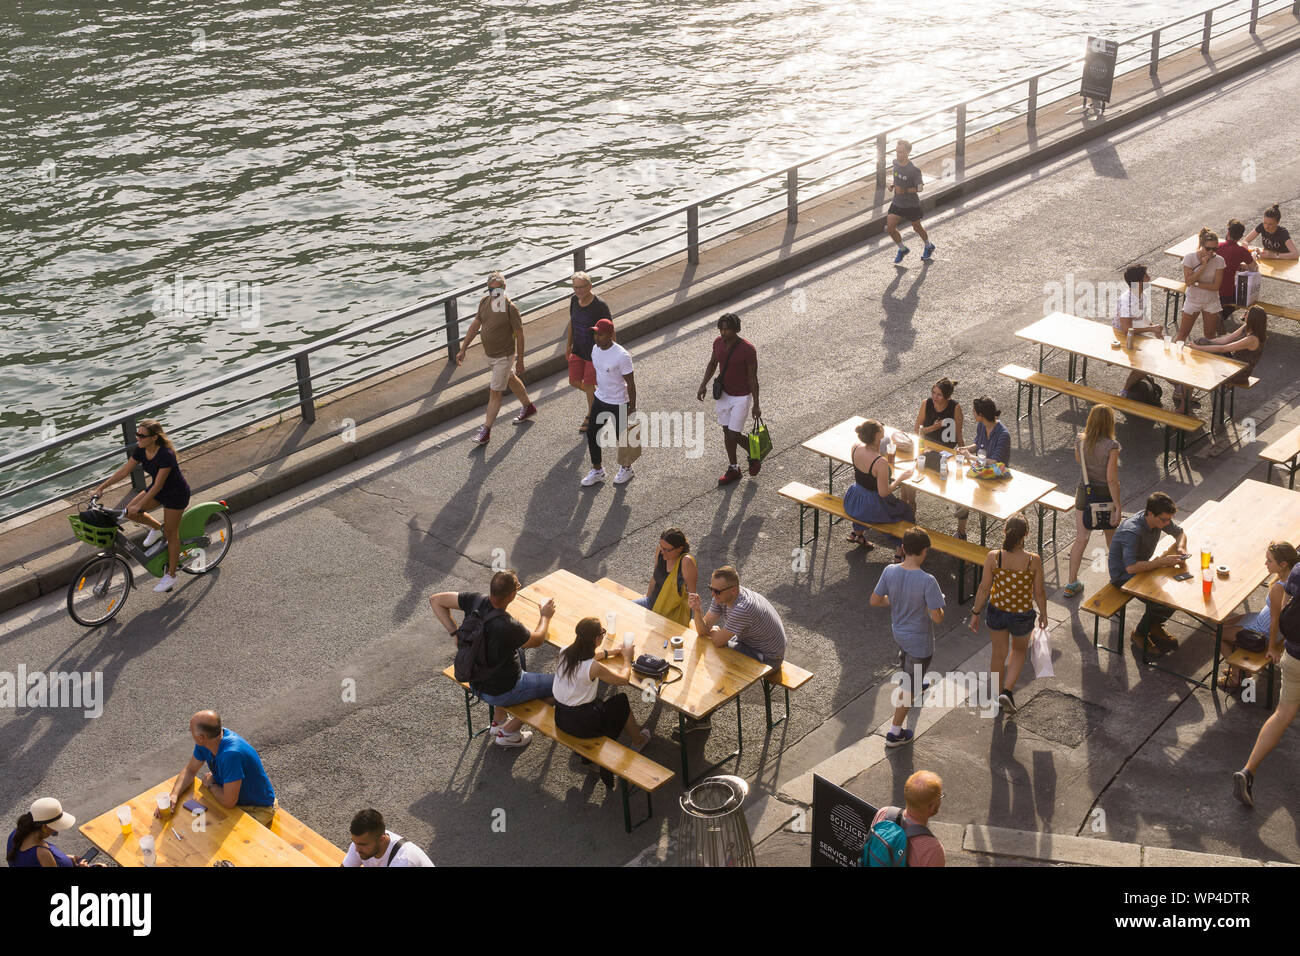 Paris riverbank - people enjoying summer on the Seine riverbank in the 1st arrondissement of Paris, France, Europe. Stock Photo